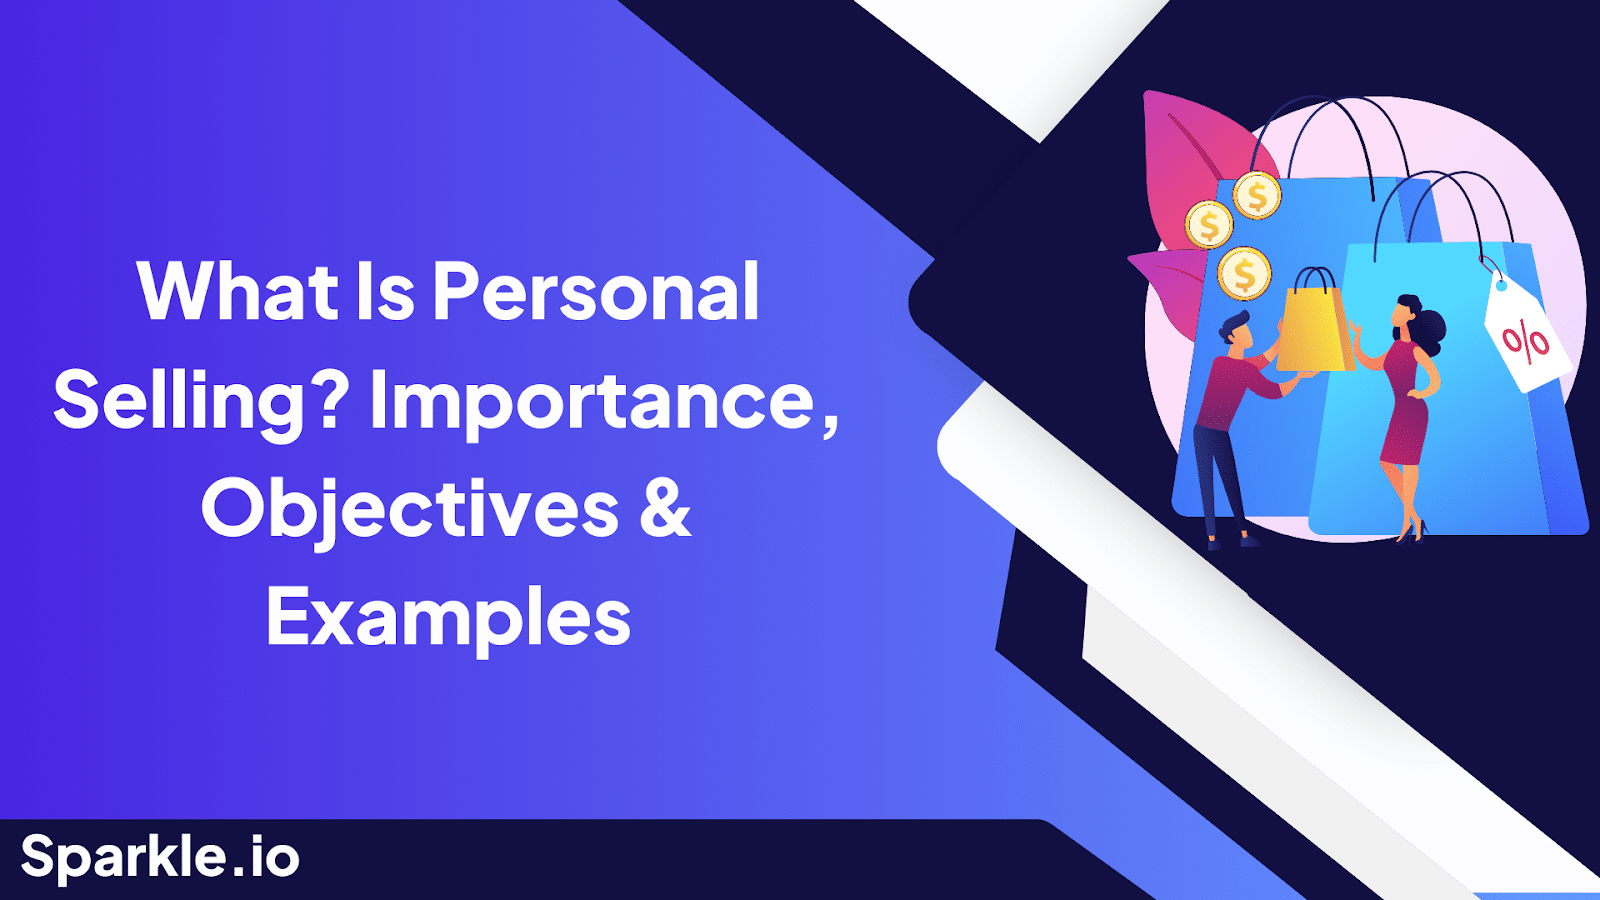 What Is Personal Selling? Importance, Objectives & Examples